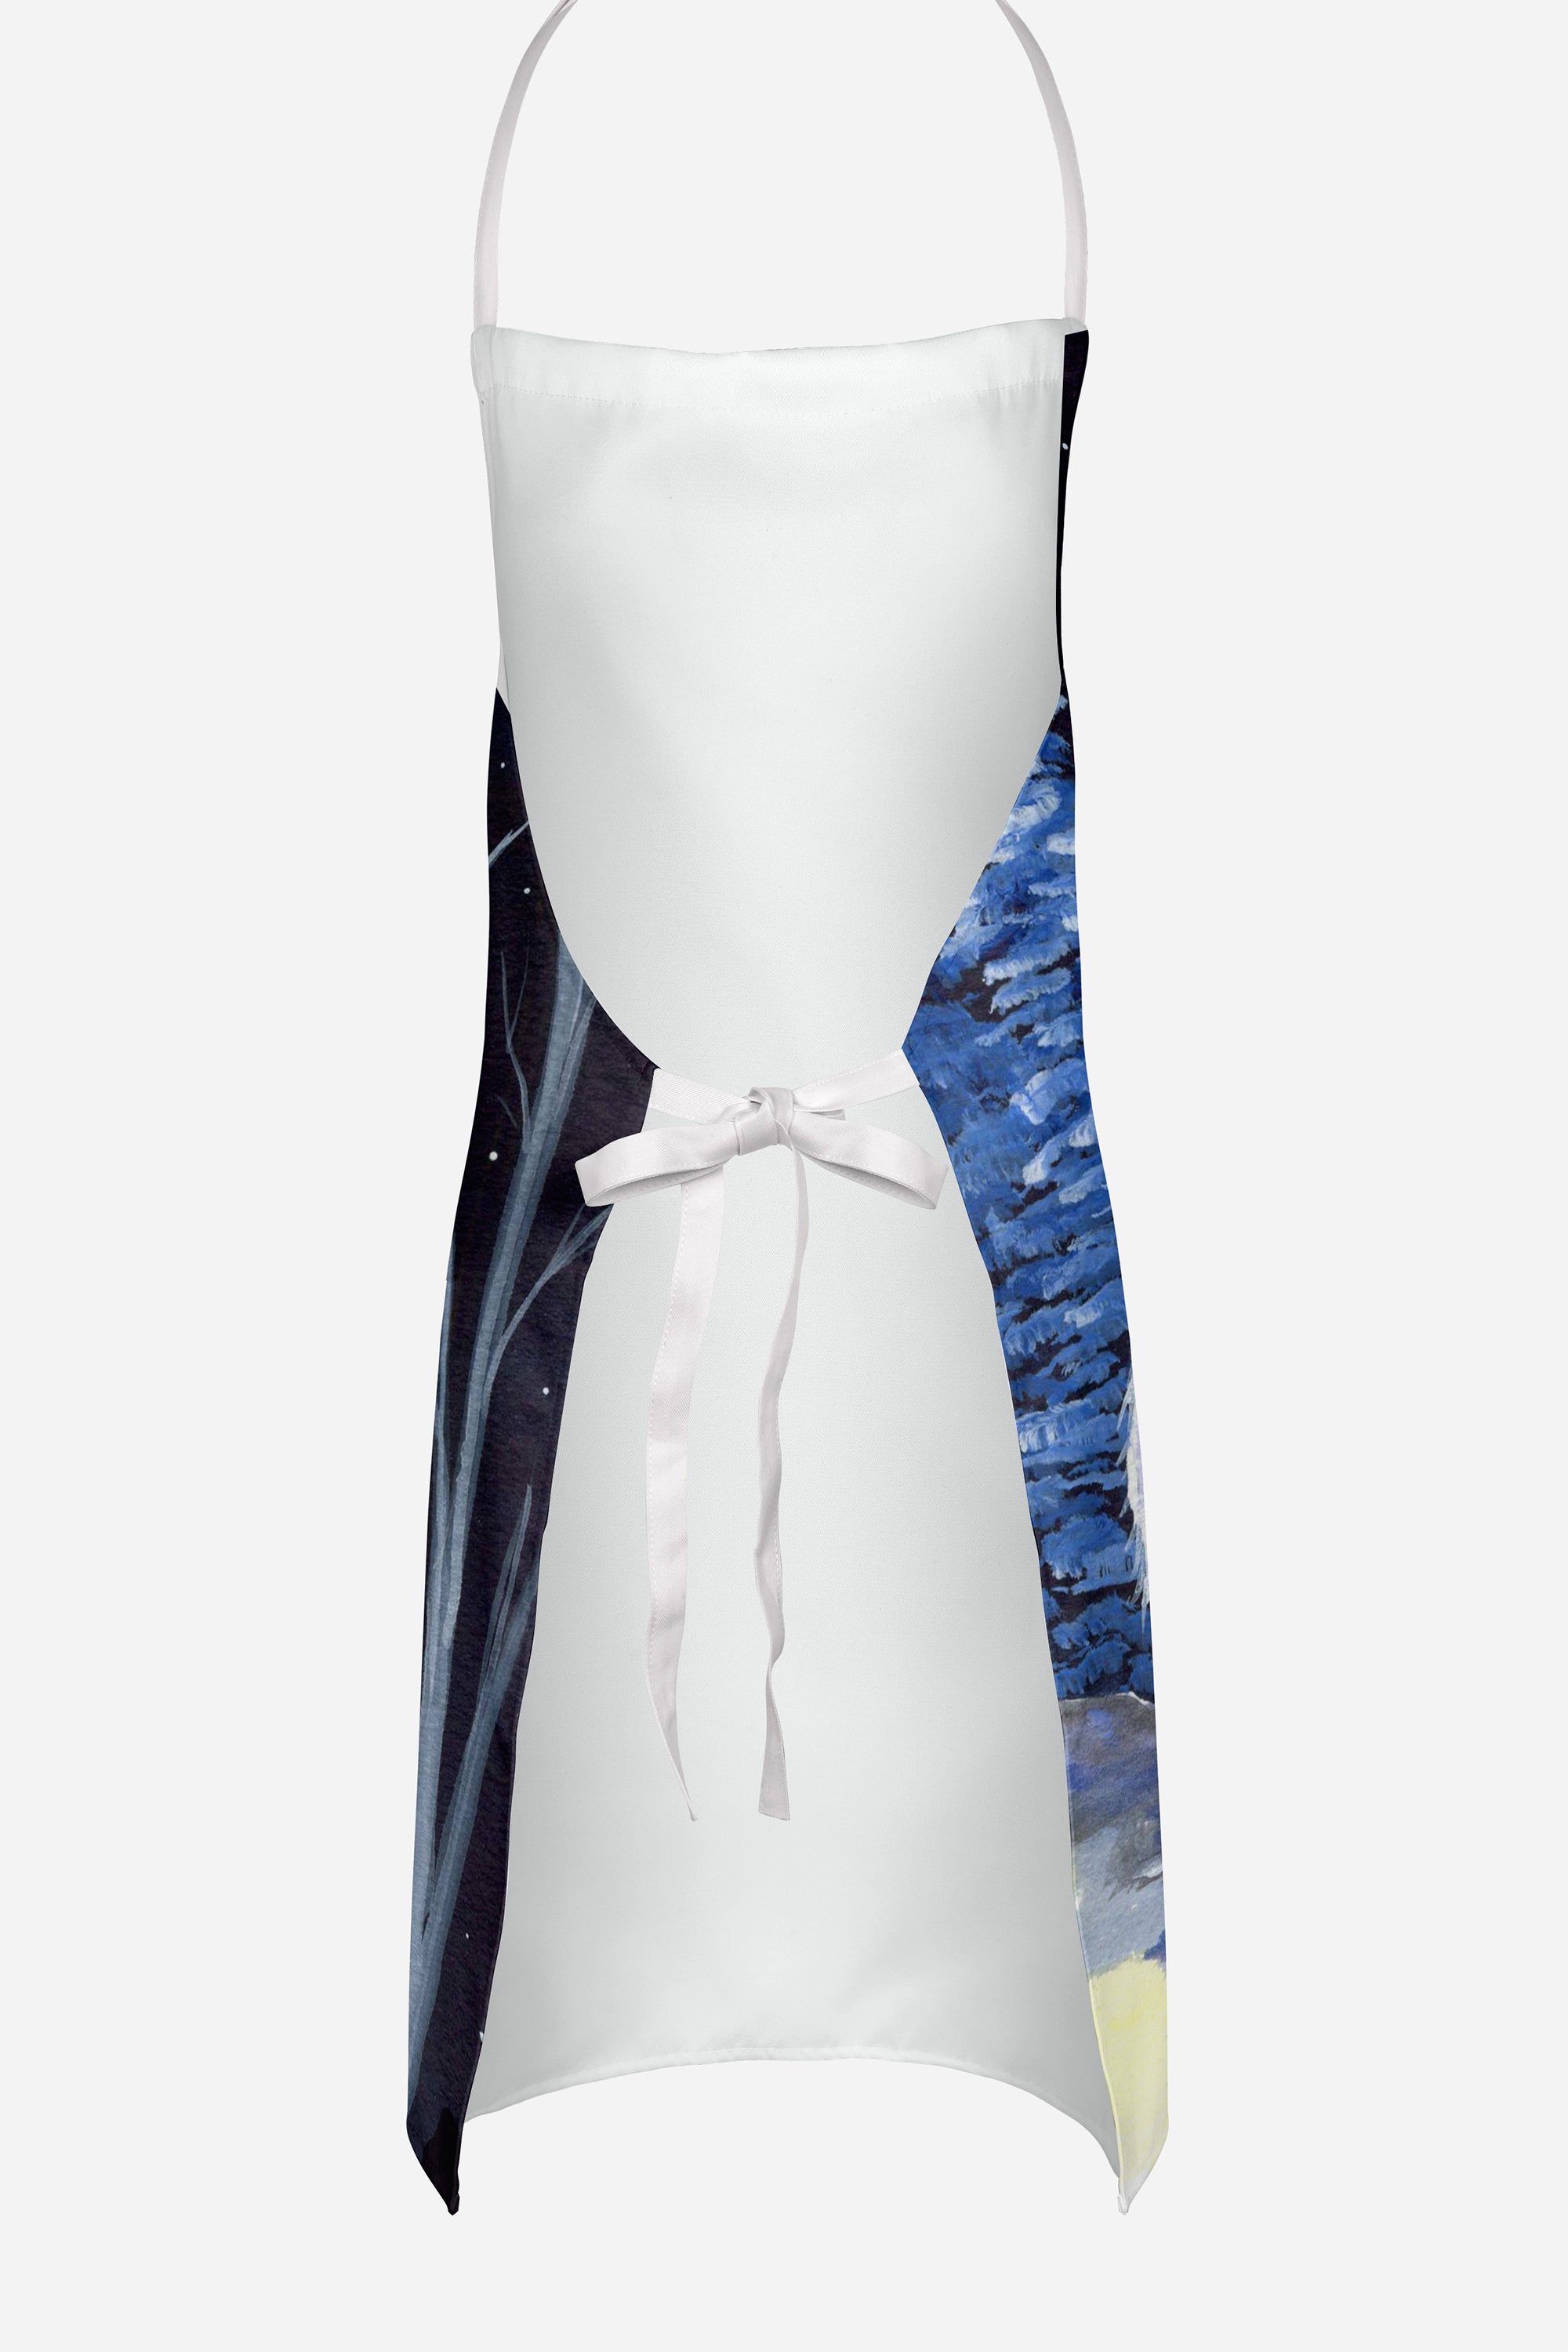 Starry Night Japanese Chin Apron - the-store.com